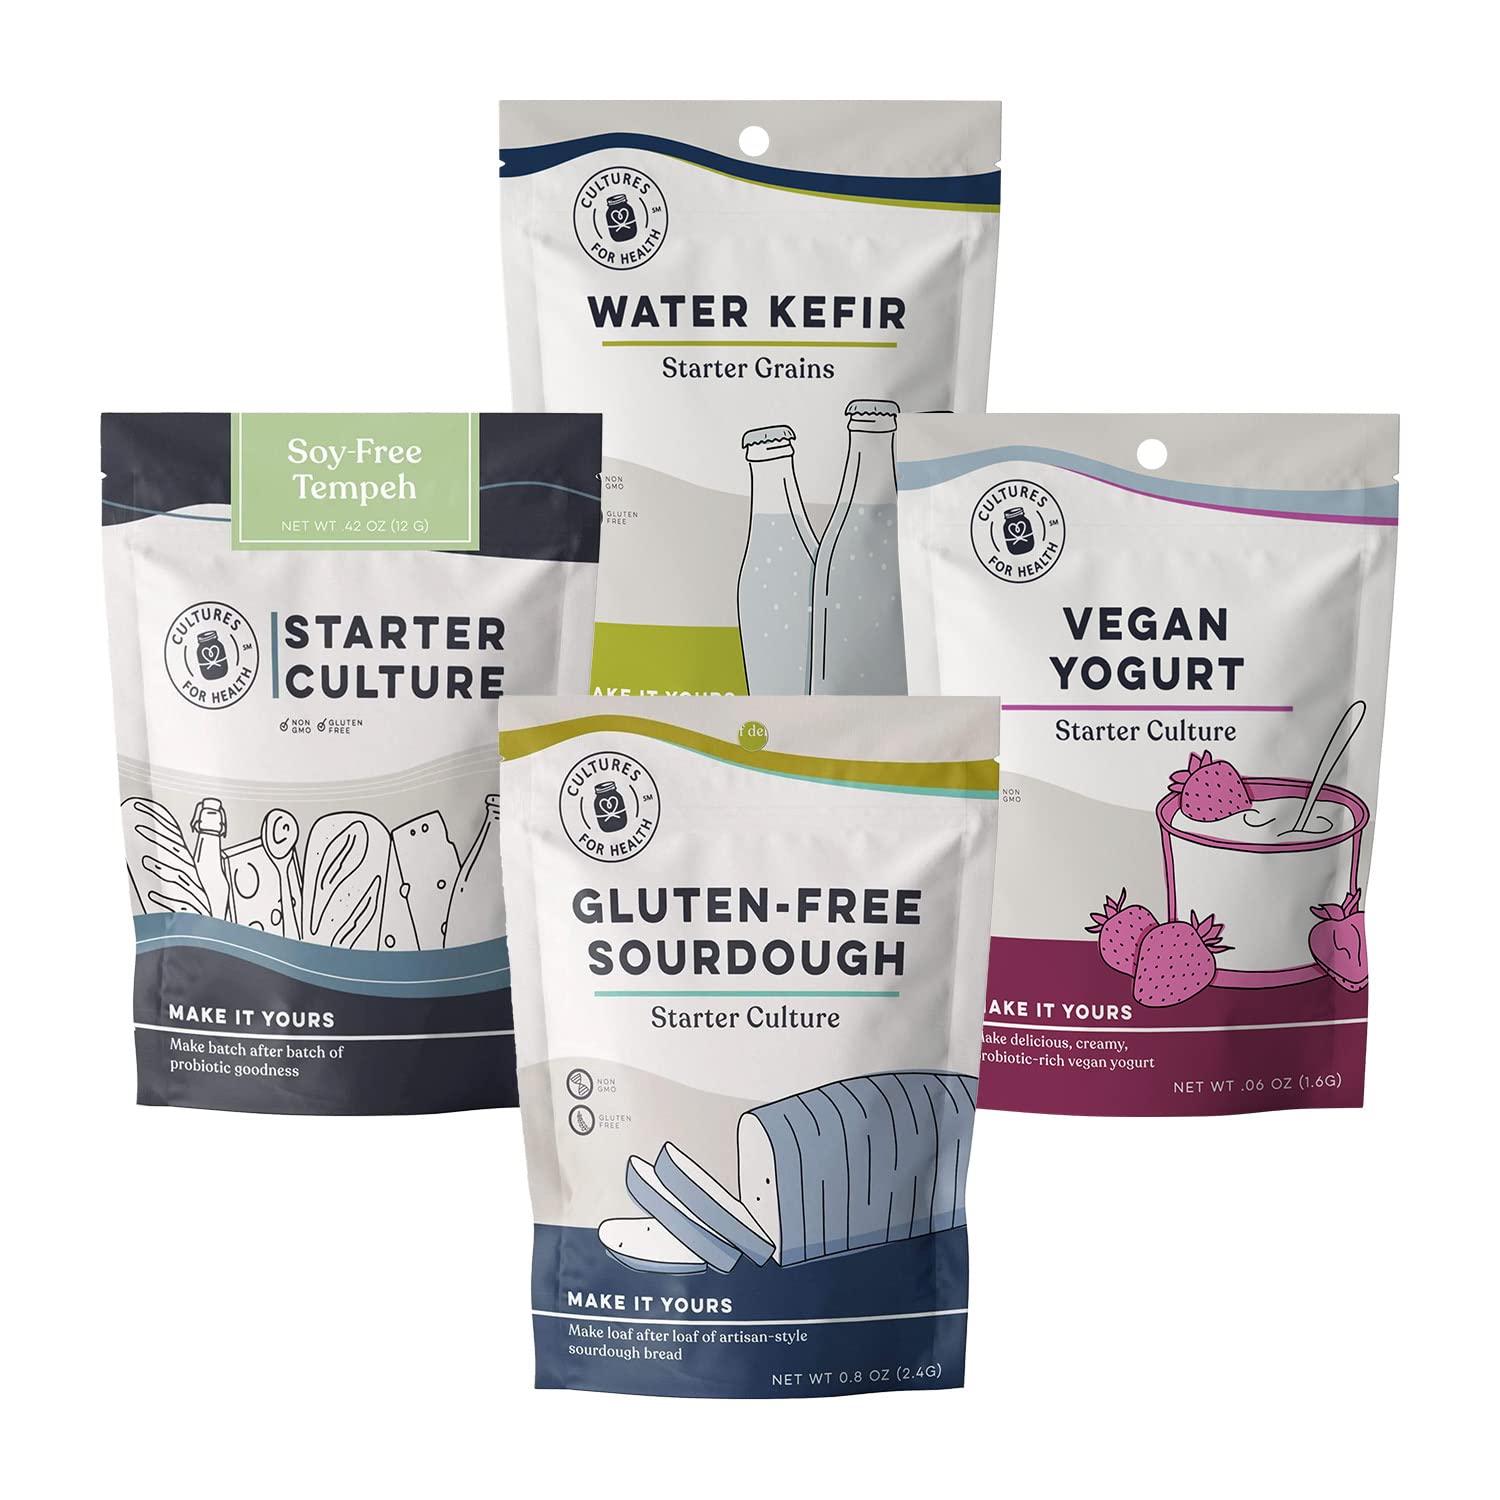 Cultures for Health "Worry Free" Bundle | Starters for Gluten Free Sourdough, Vegan Yogurt, Water Kefir, & Soy Free Tempeh | Alternatives for Dietary Needs | DIY Gift Set for Healthy Lifestyle